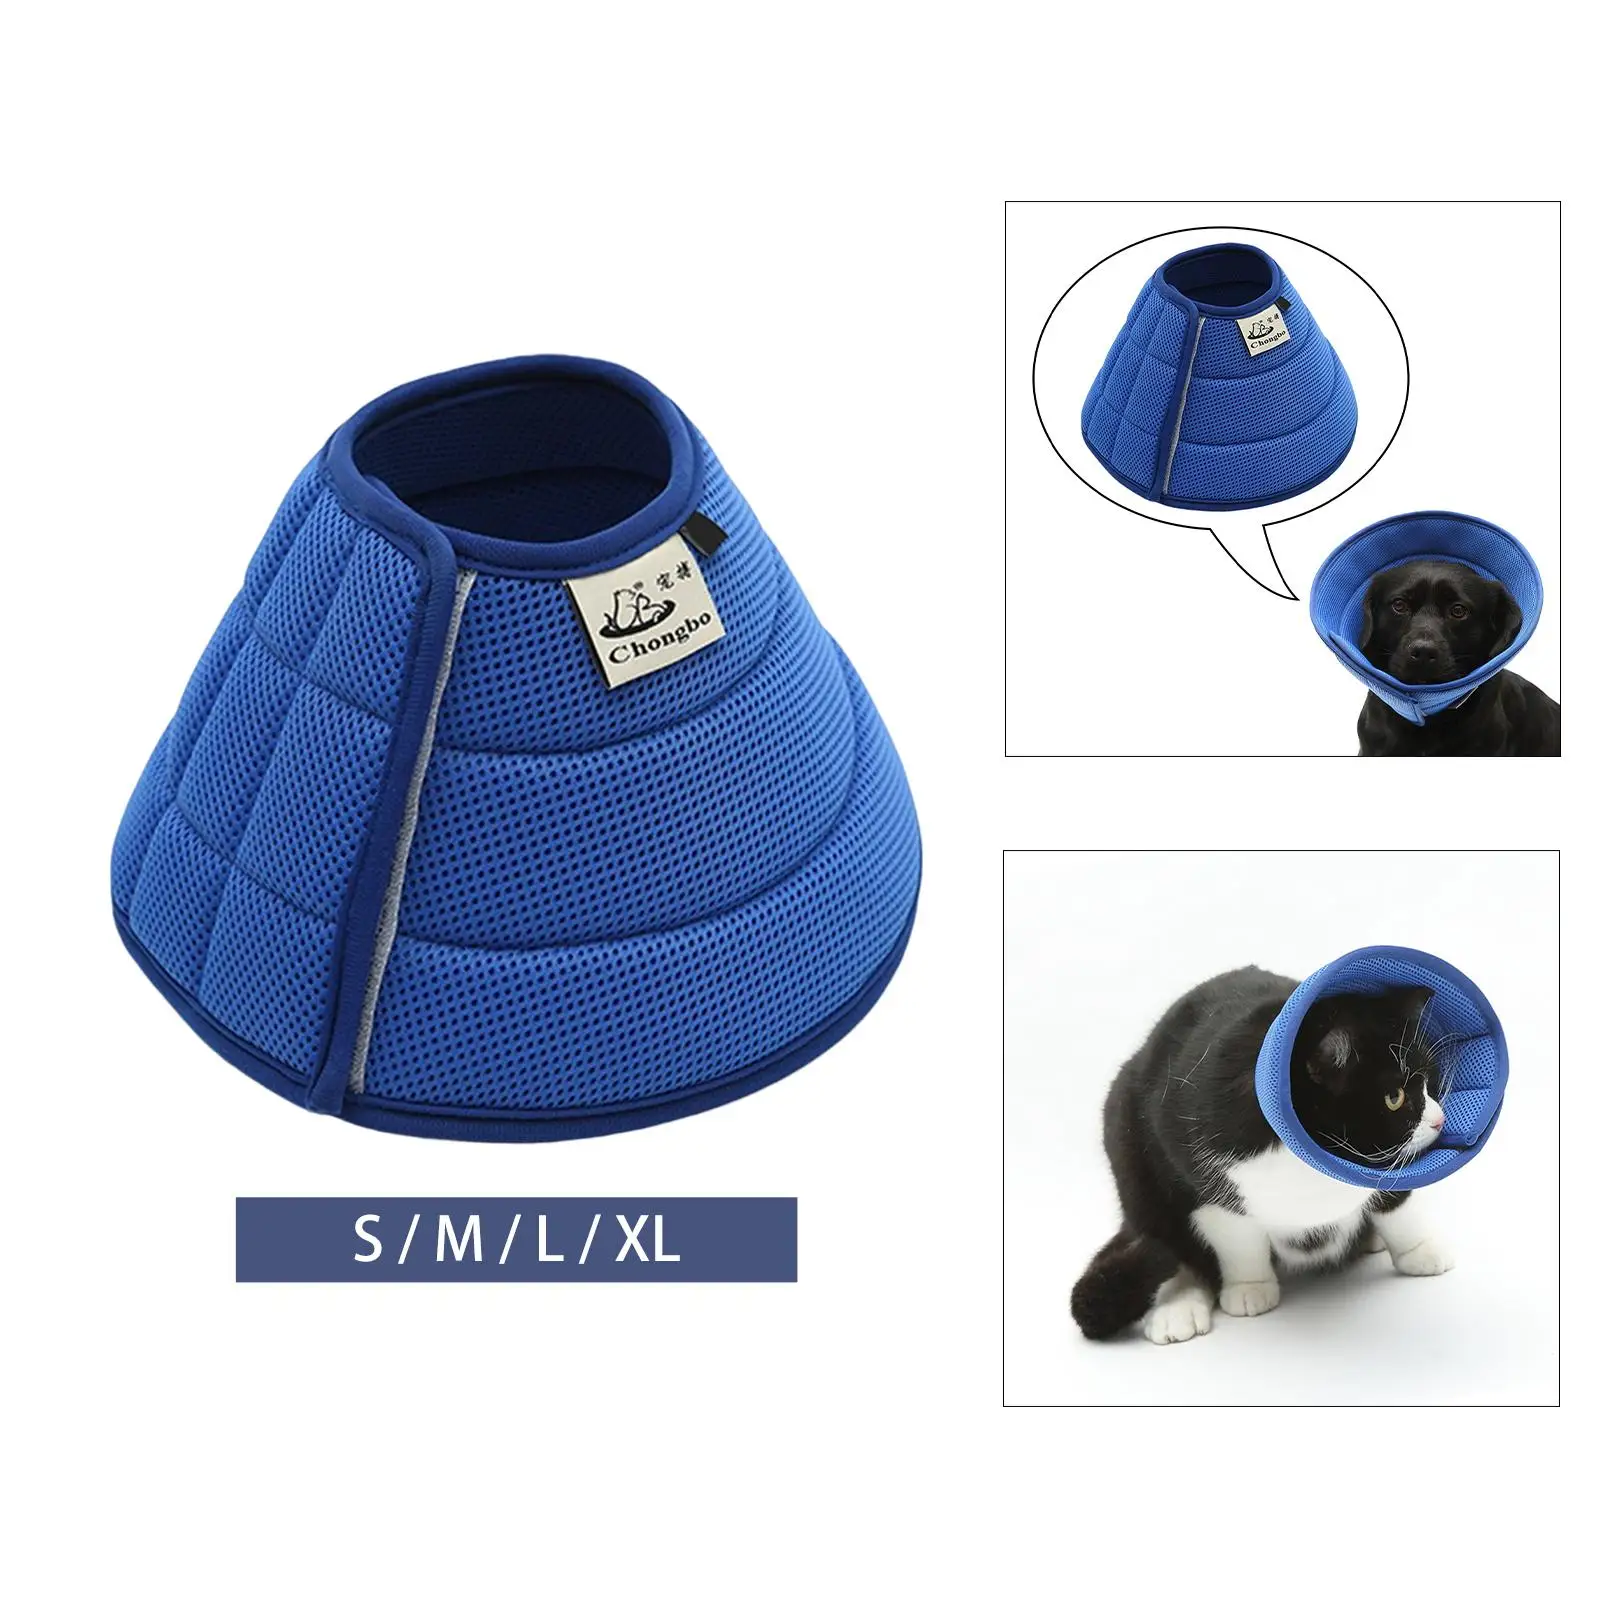 Cone Collar Protective Wound Protective Cone Prevent Biting & Scratching